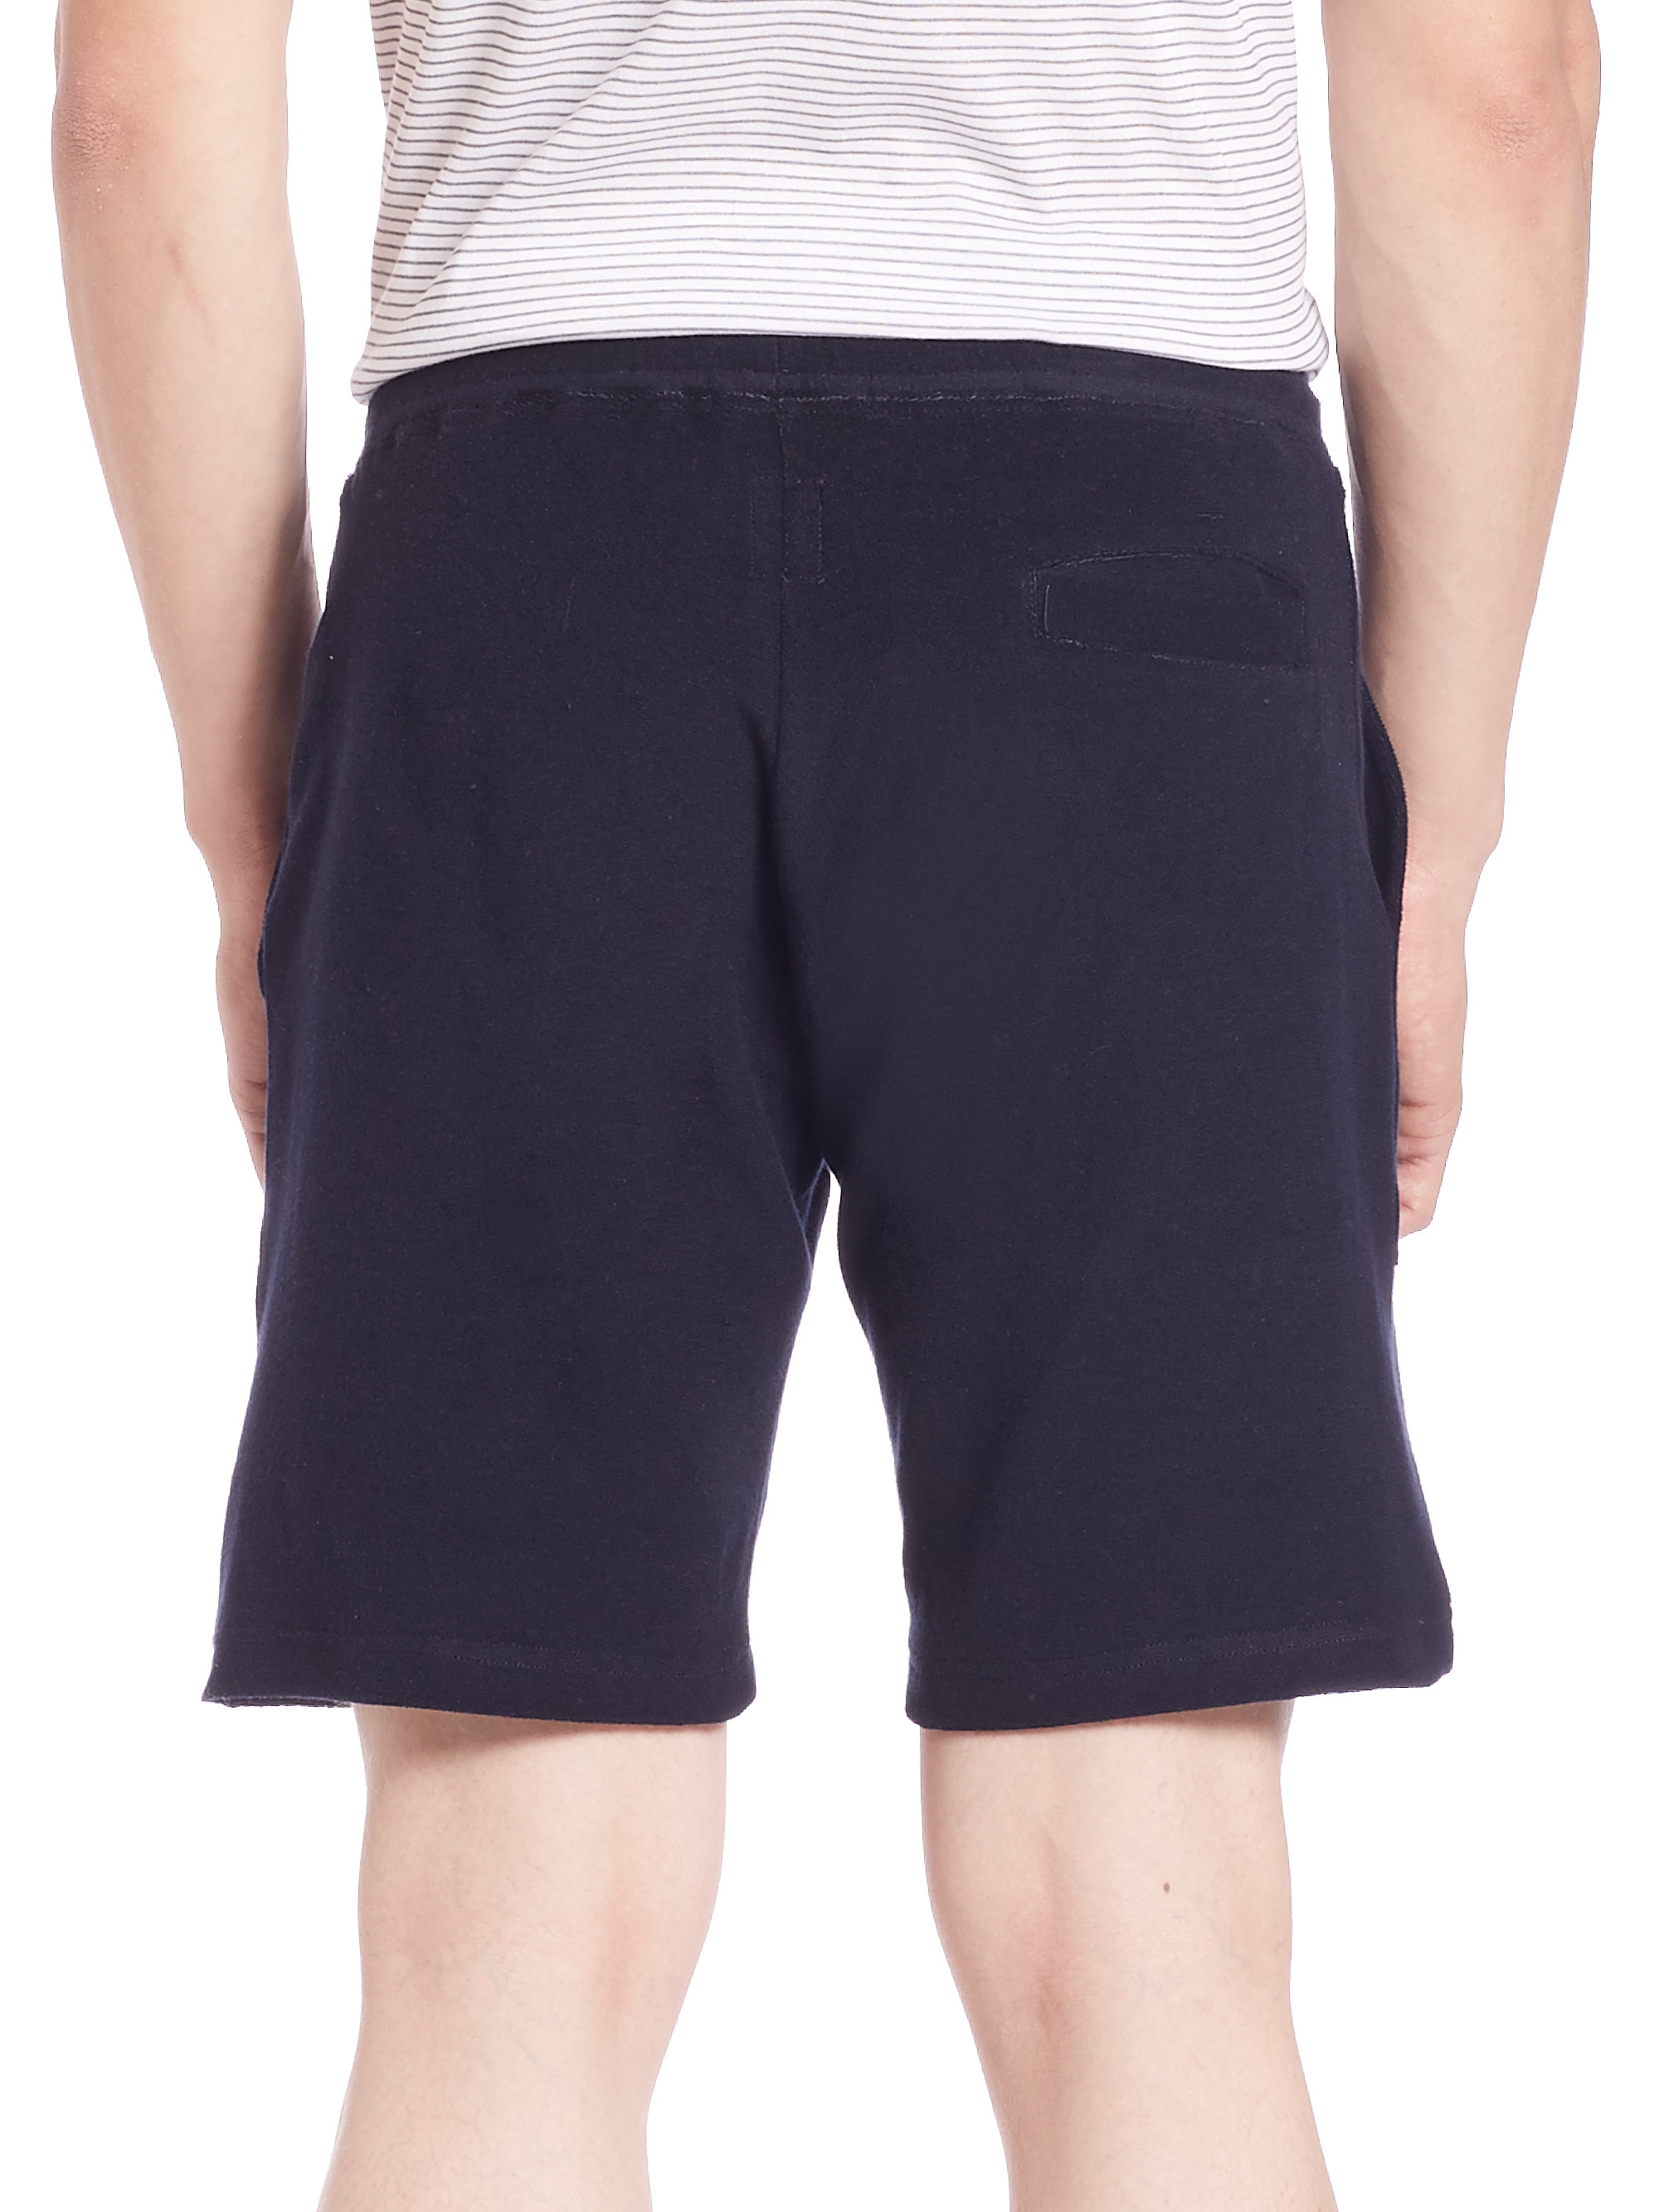 Eleventy Cotton Terry Cloth Sweat Shorts in Navy (Blue) for Men - Lyst